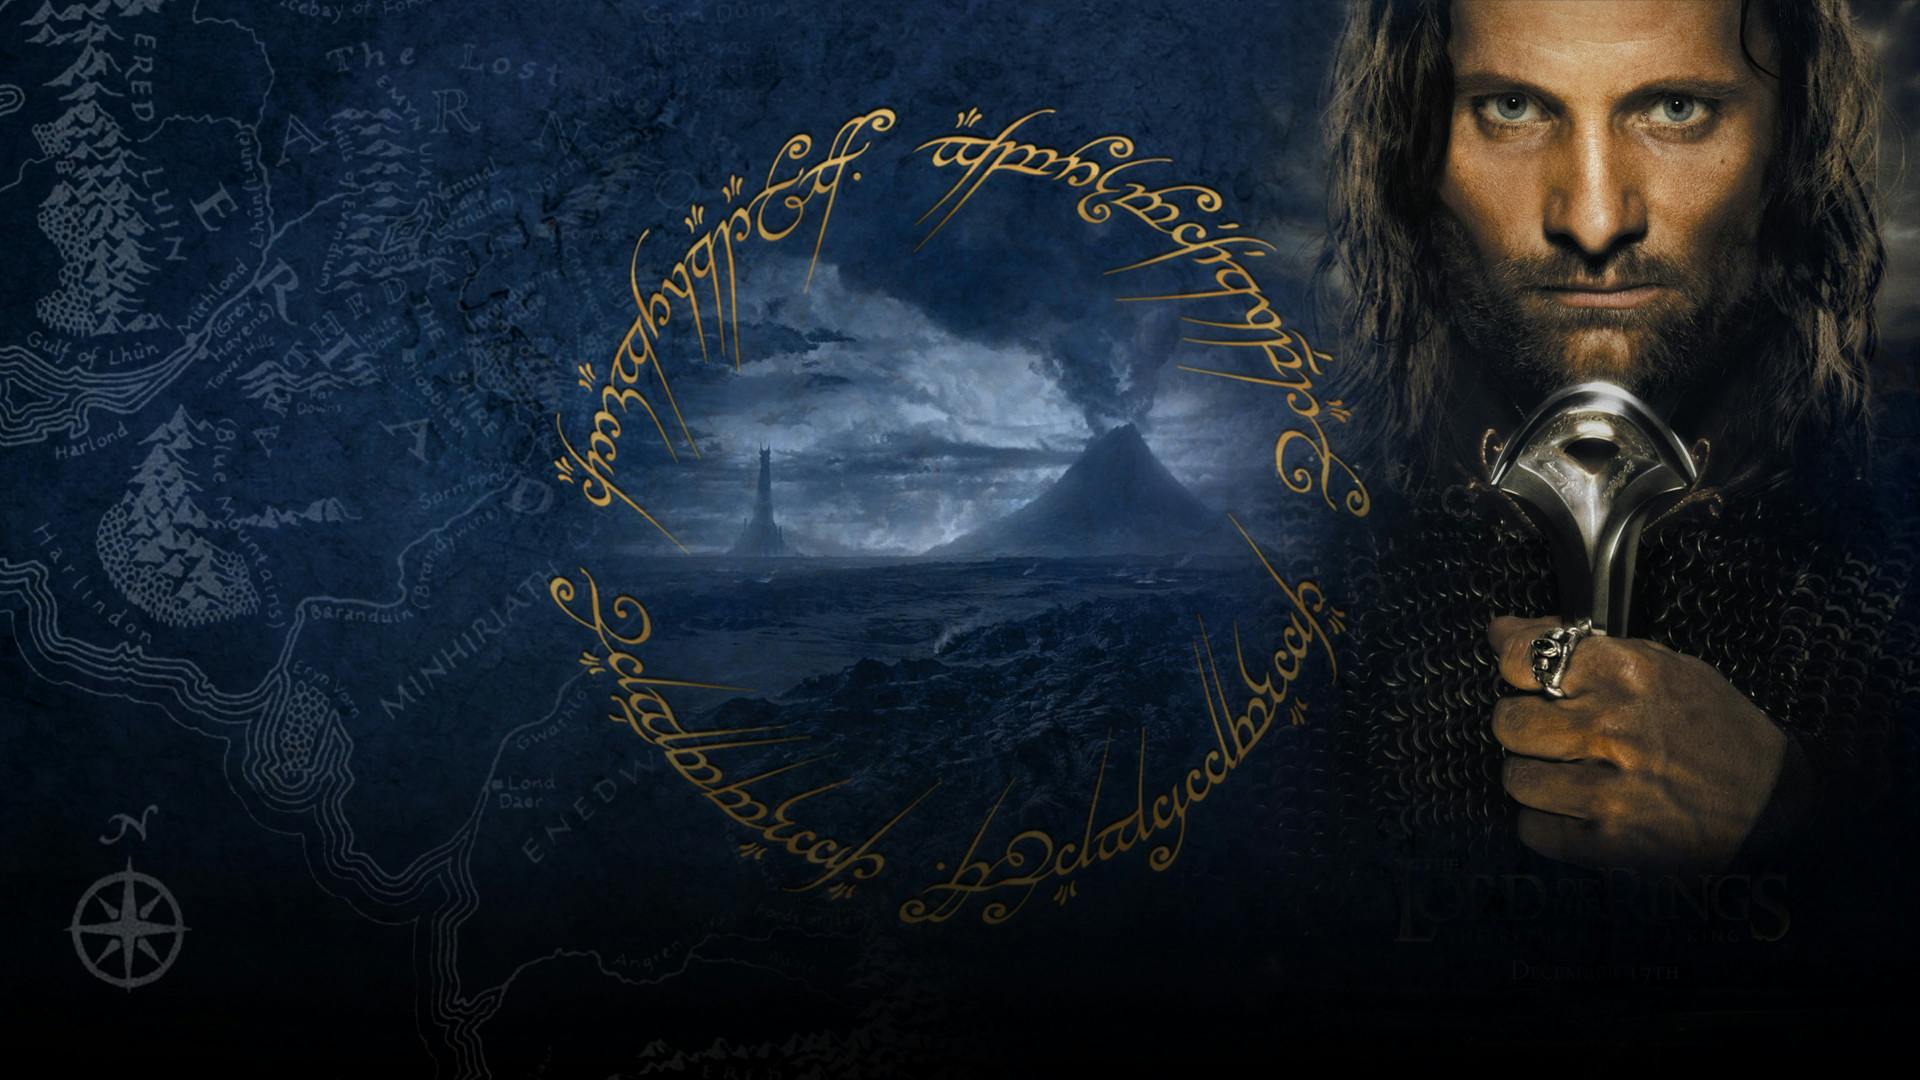 Middle Earth is moving:  shifts 'Lord of the Rings' filming to UK